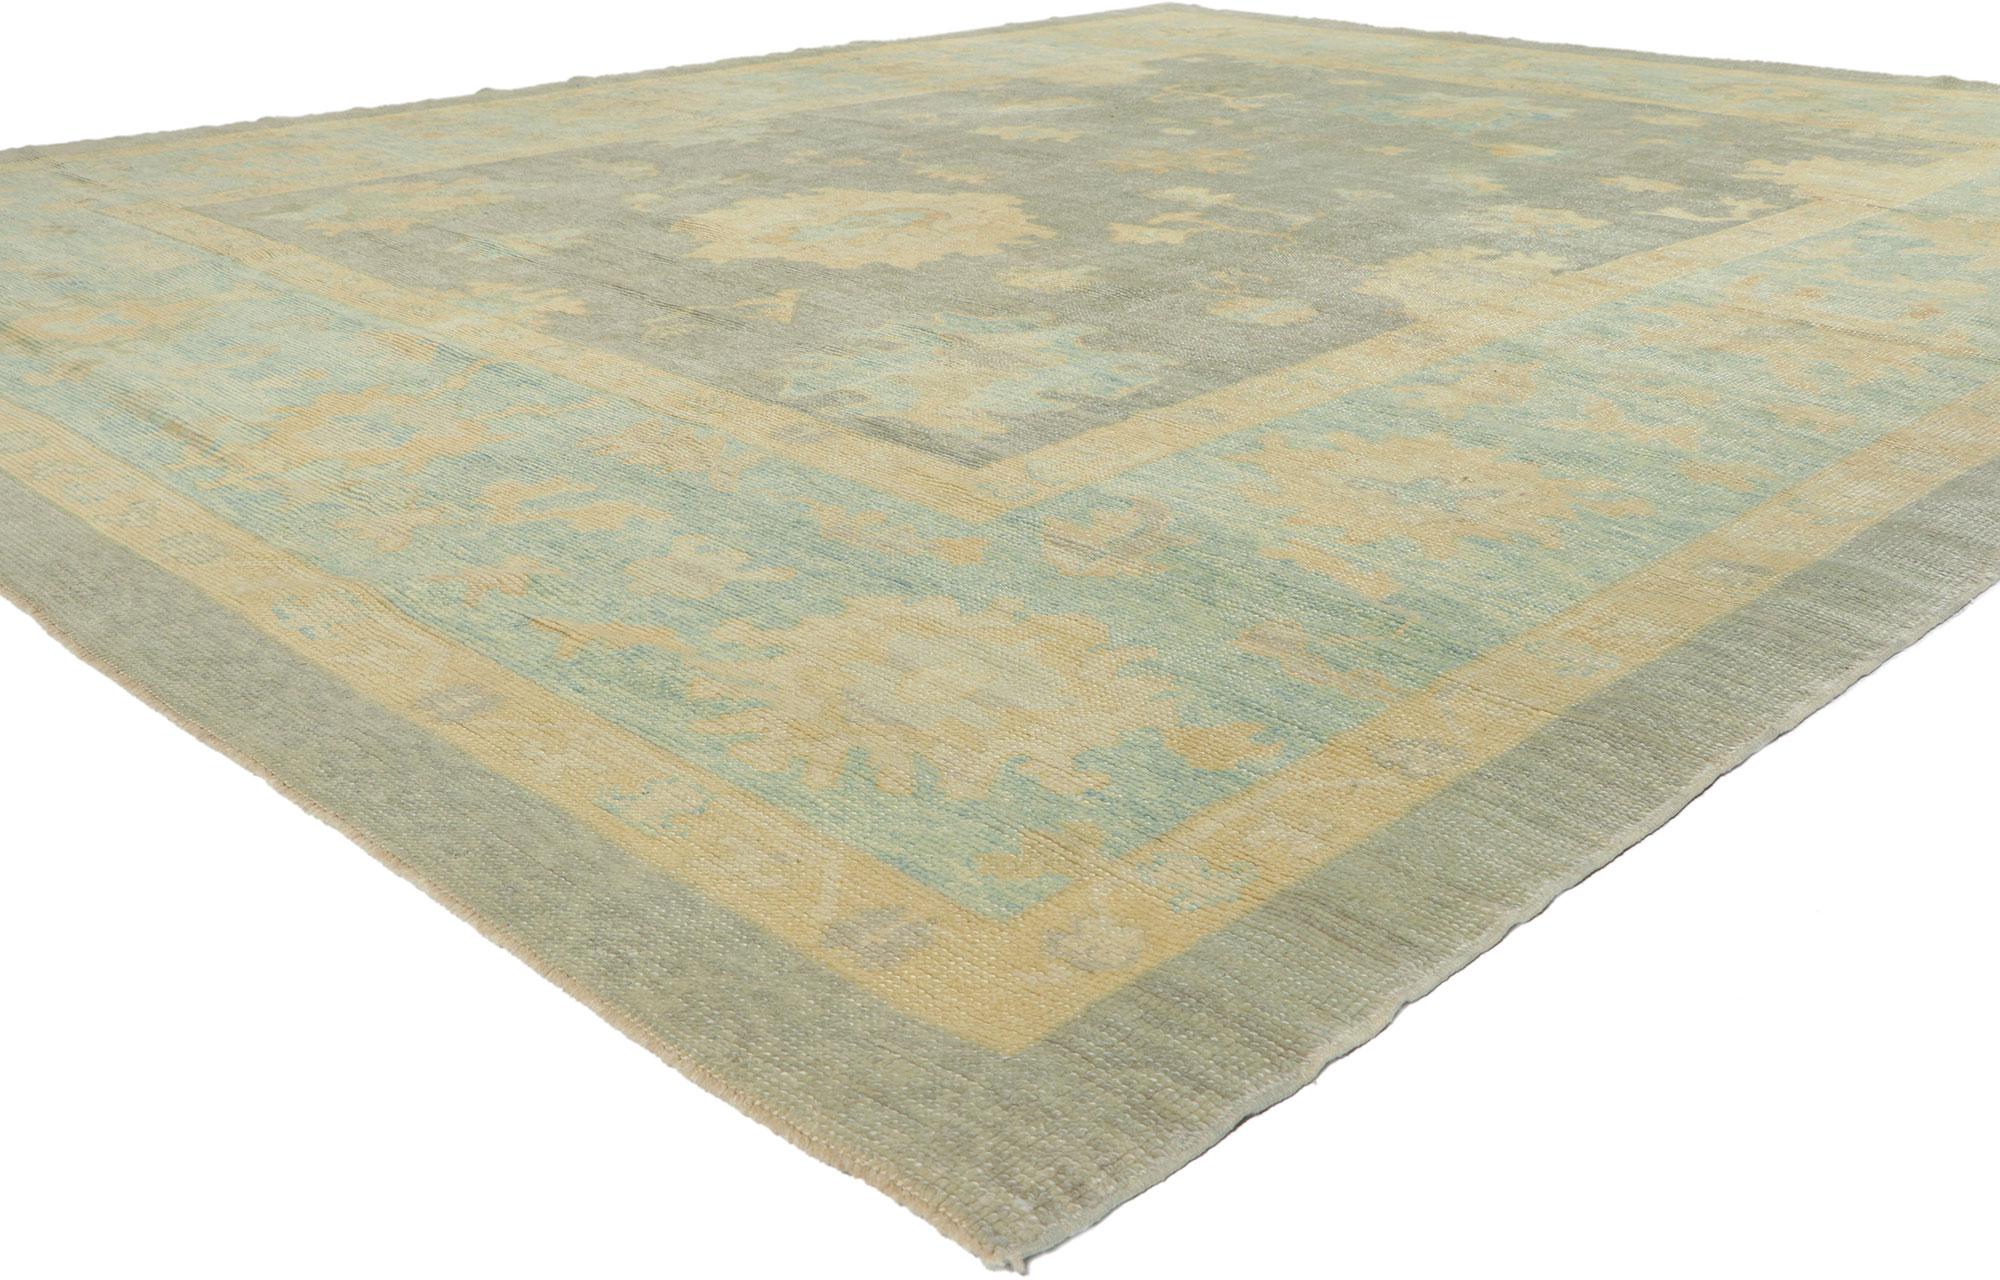 53455 Modern Oushak Turkish Rug, 10'03 x 12'04. 
Blending elements from the modern world with a calming coastal color palette, this hand knotted wool Turkish Oushak rug is poised to impress. It features an all-over botanical pattern composed of